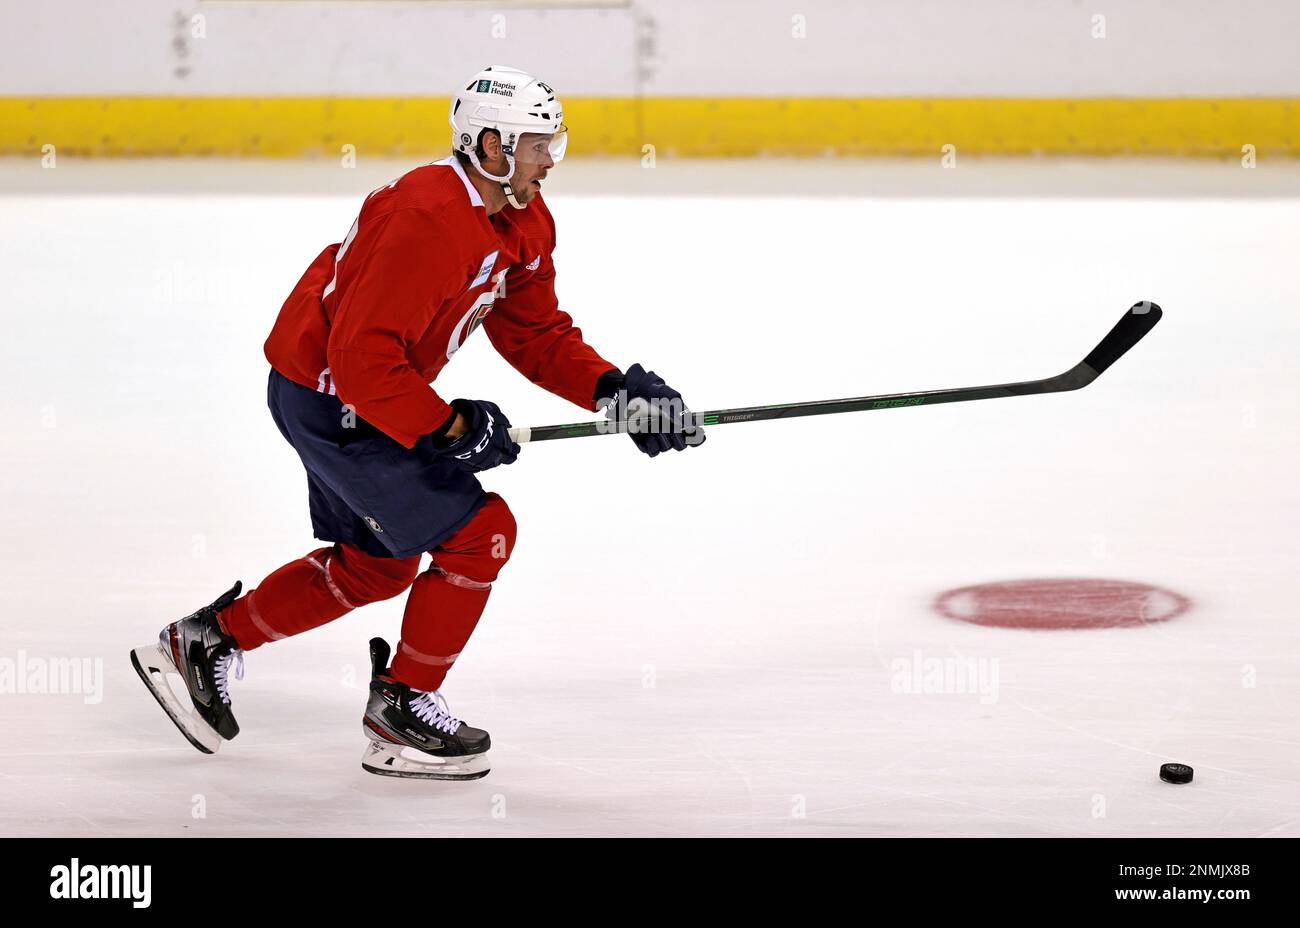 Florida Panthers center Carter Verhaeghe (23) skates during training camp in preparation for the 2021-22 NHL season at the FLA Live Arena on Thursday, September 23, 2021 in Sunrise, Florida.(David Santiago/Miami Herald